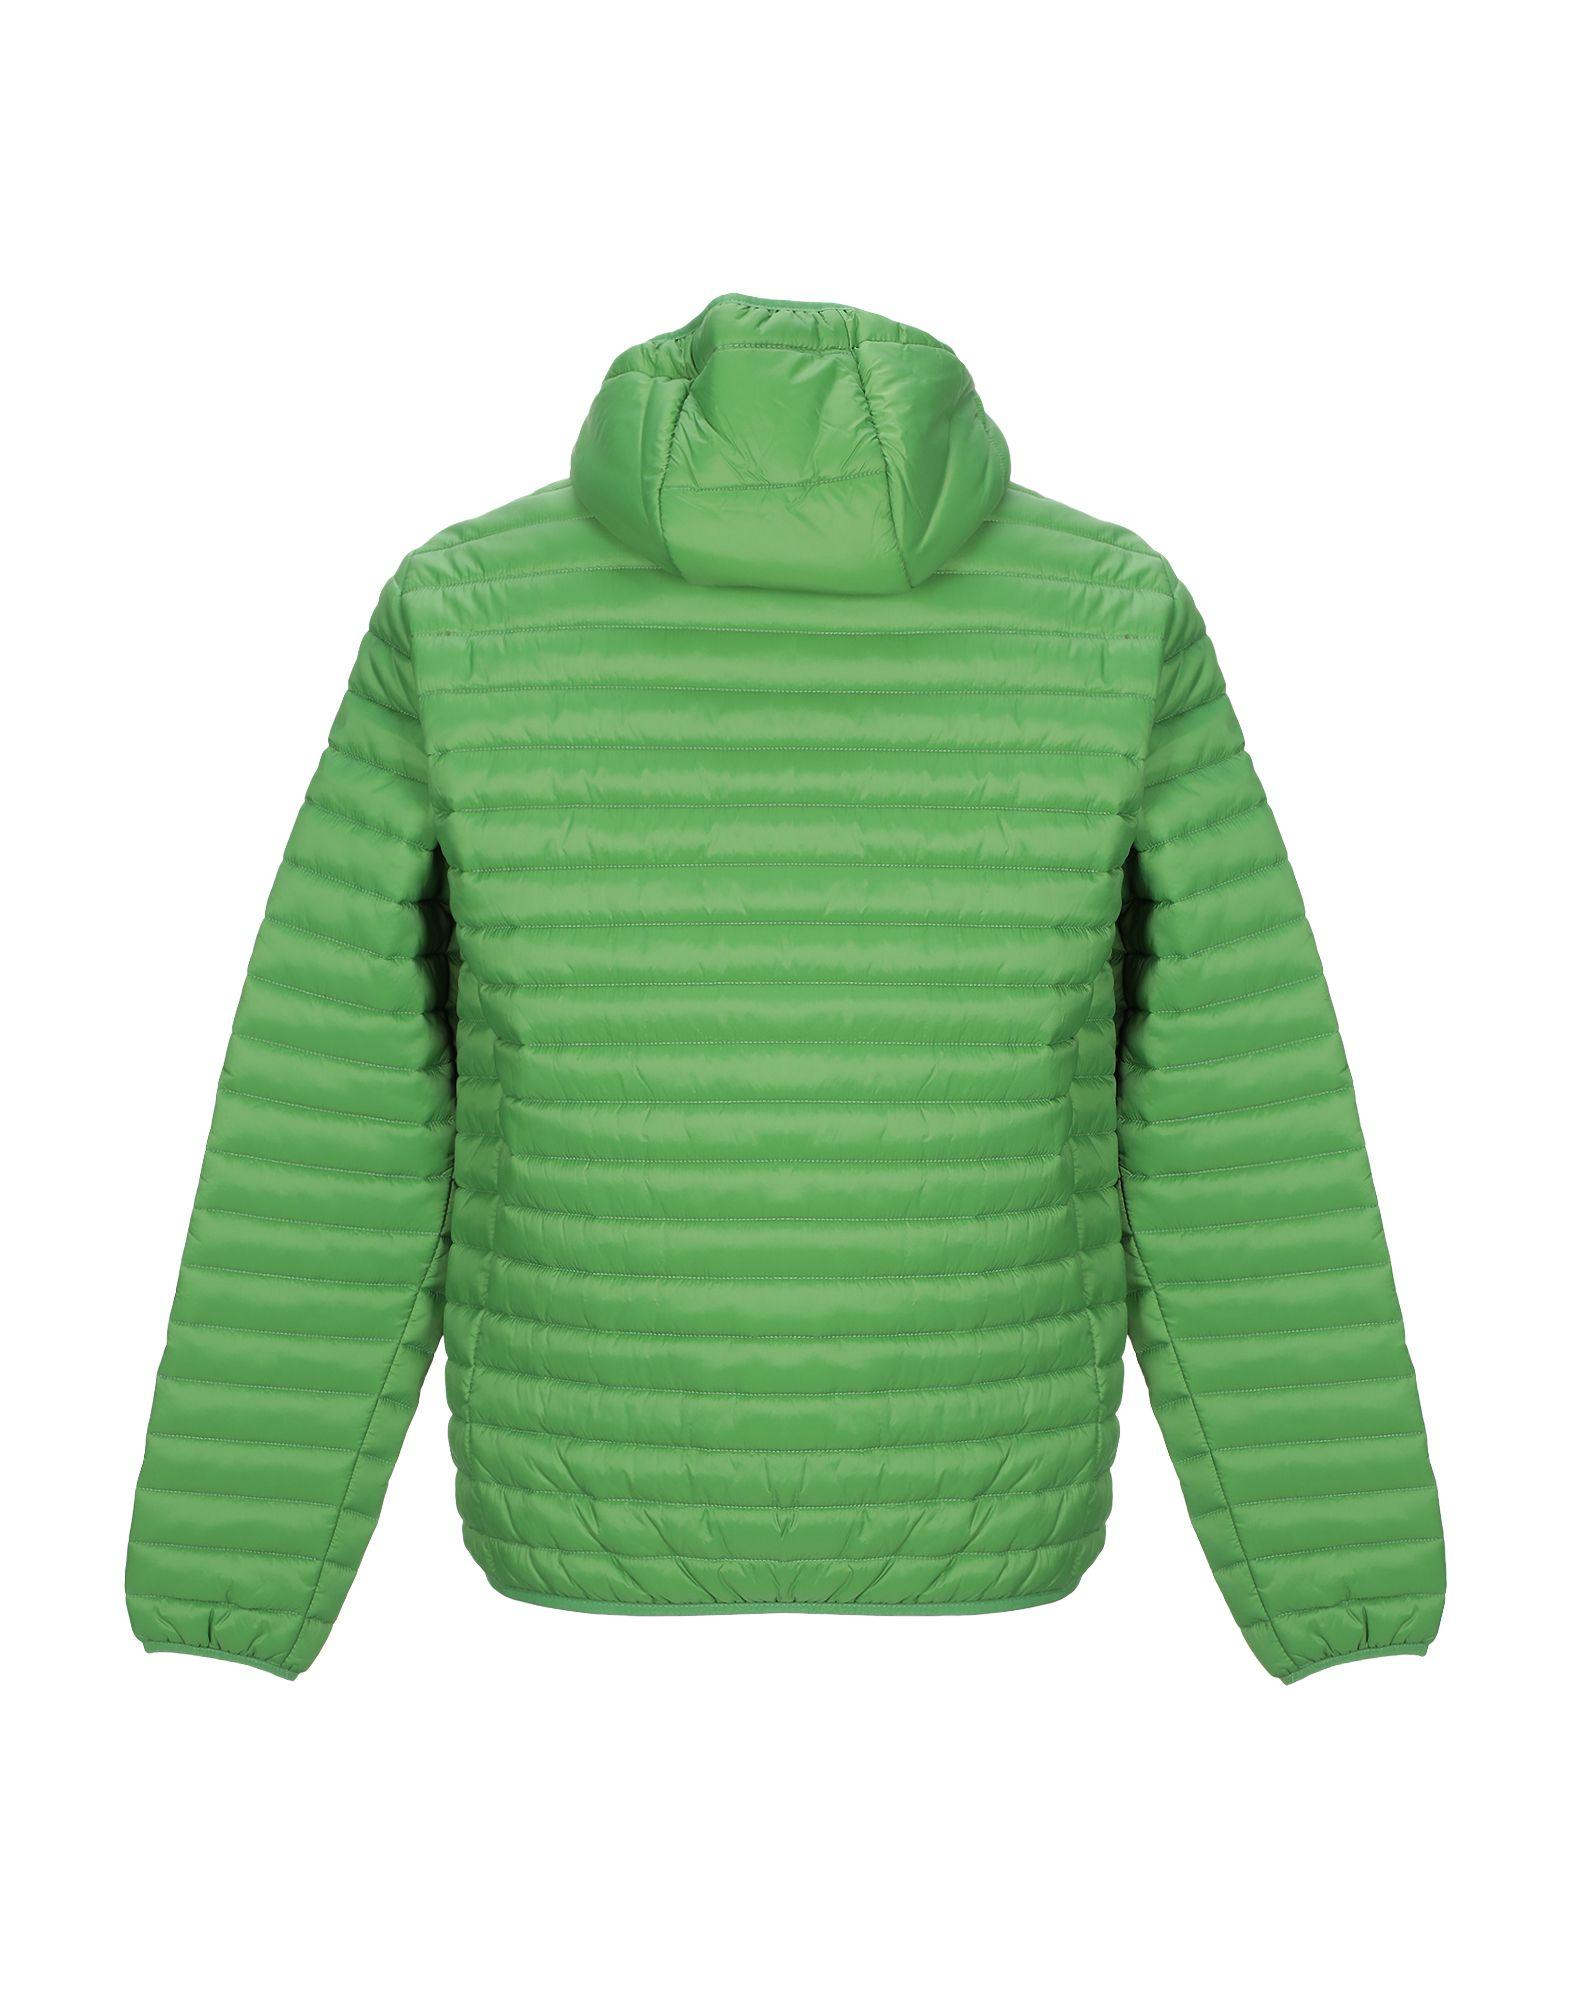 Henry Cotton's Synthetic Down Jacket in Green for Men - Lyst